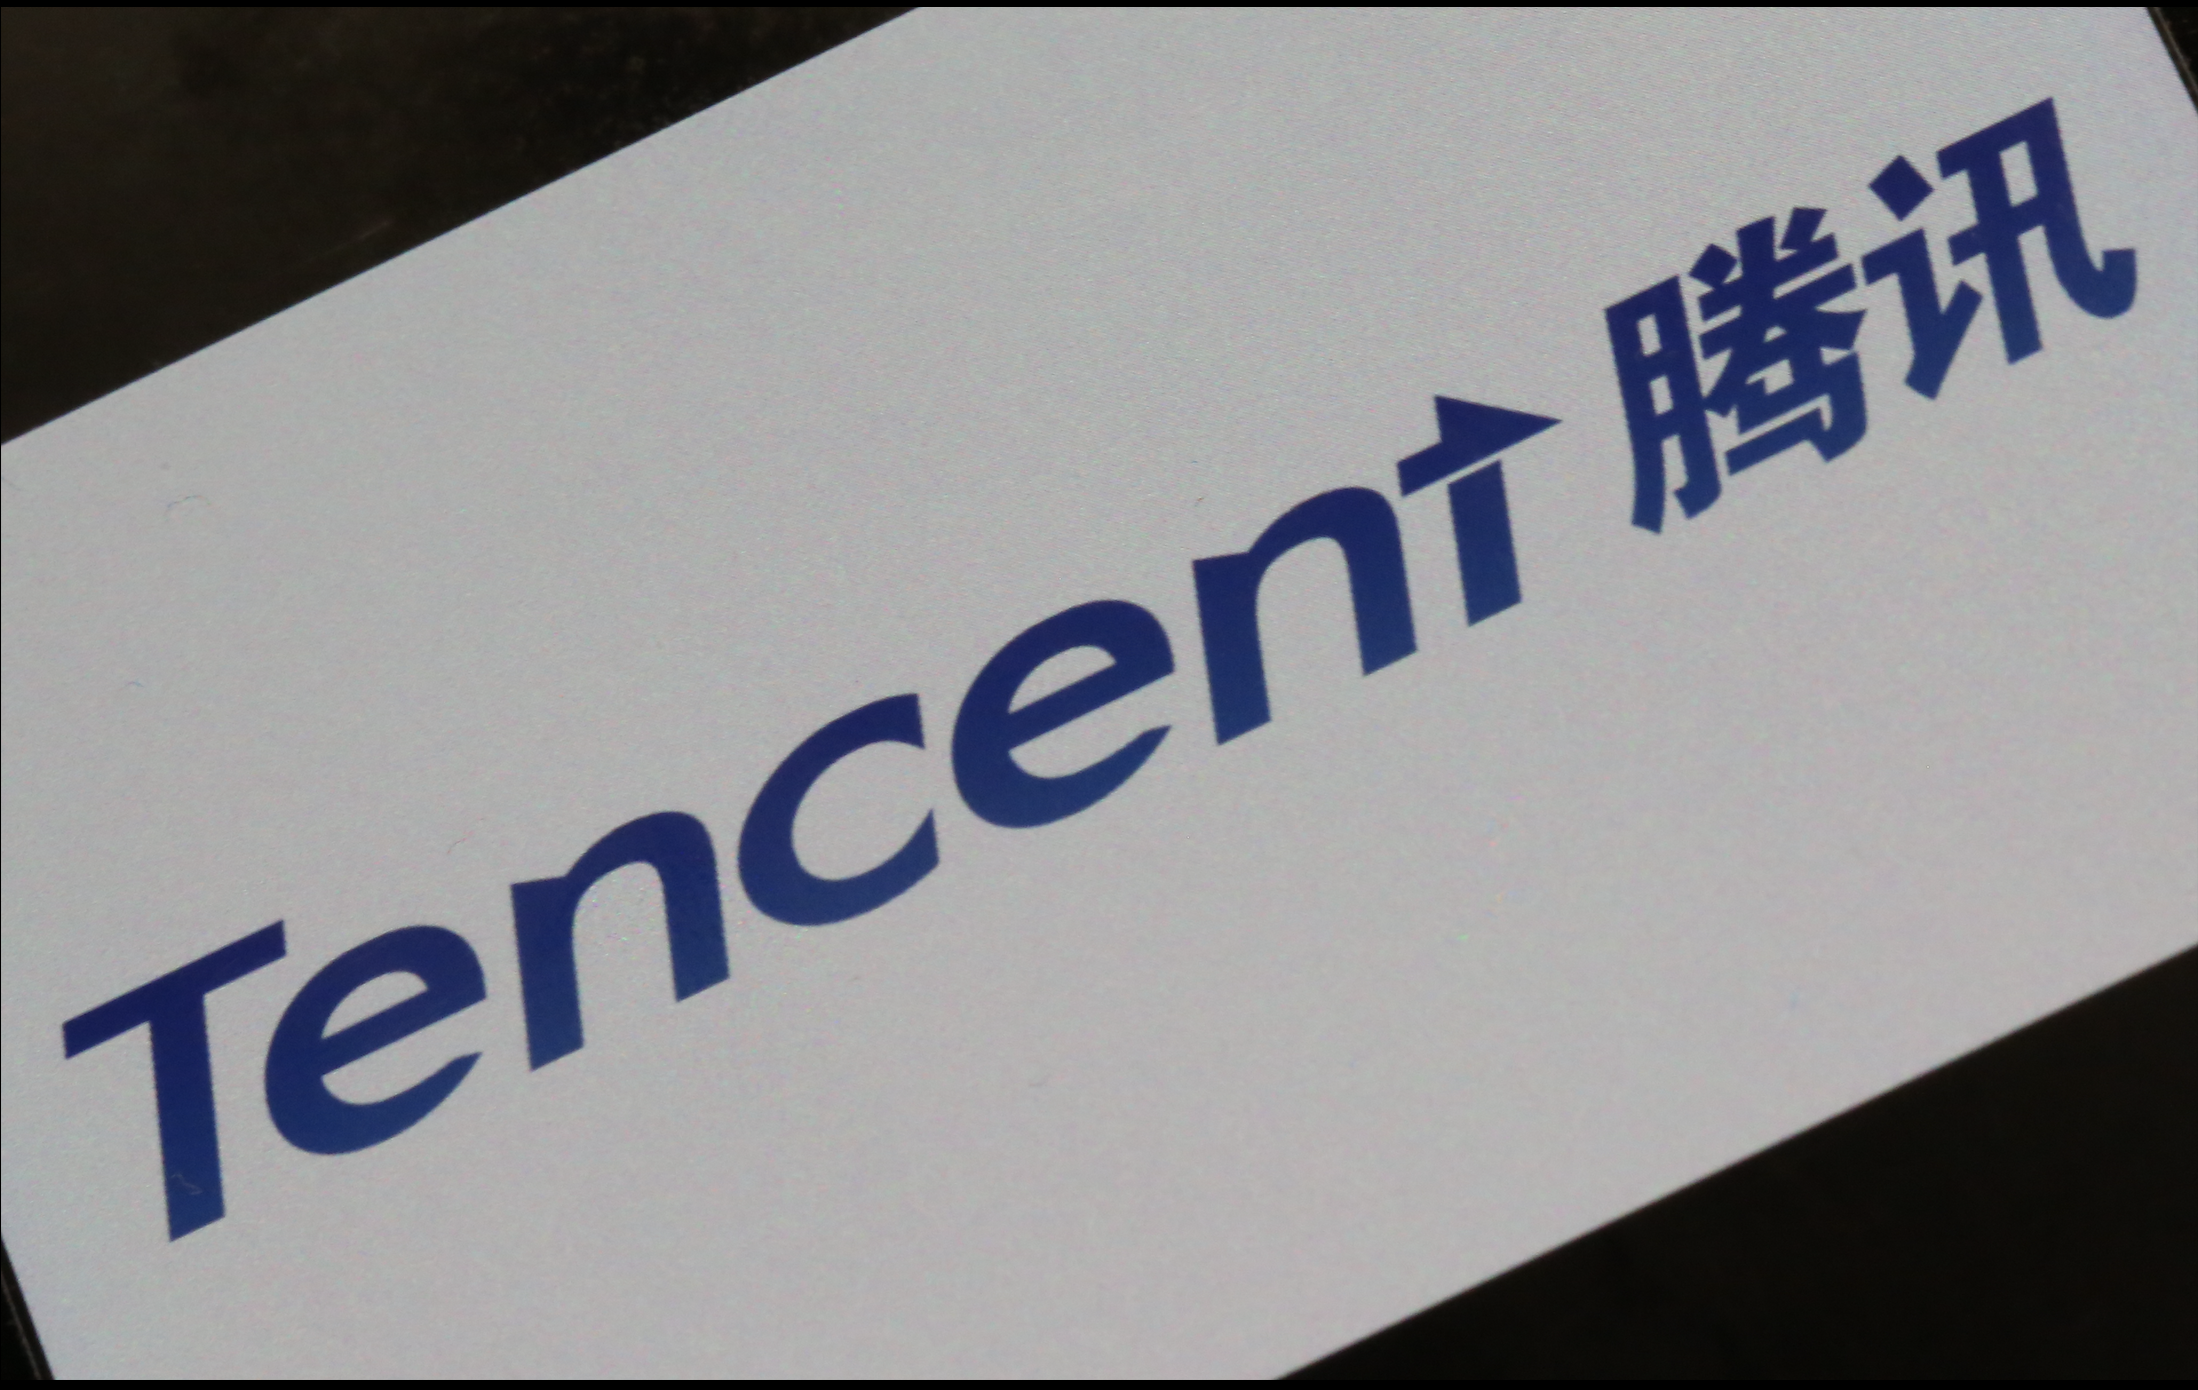 Tencent posts strong Q1 earnings, readies investment boost despite regulatory risk